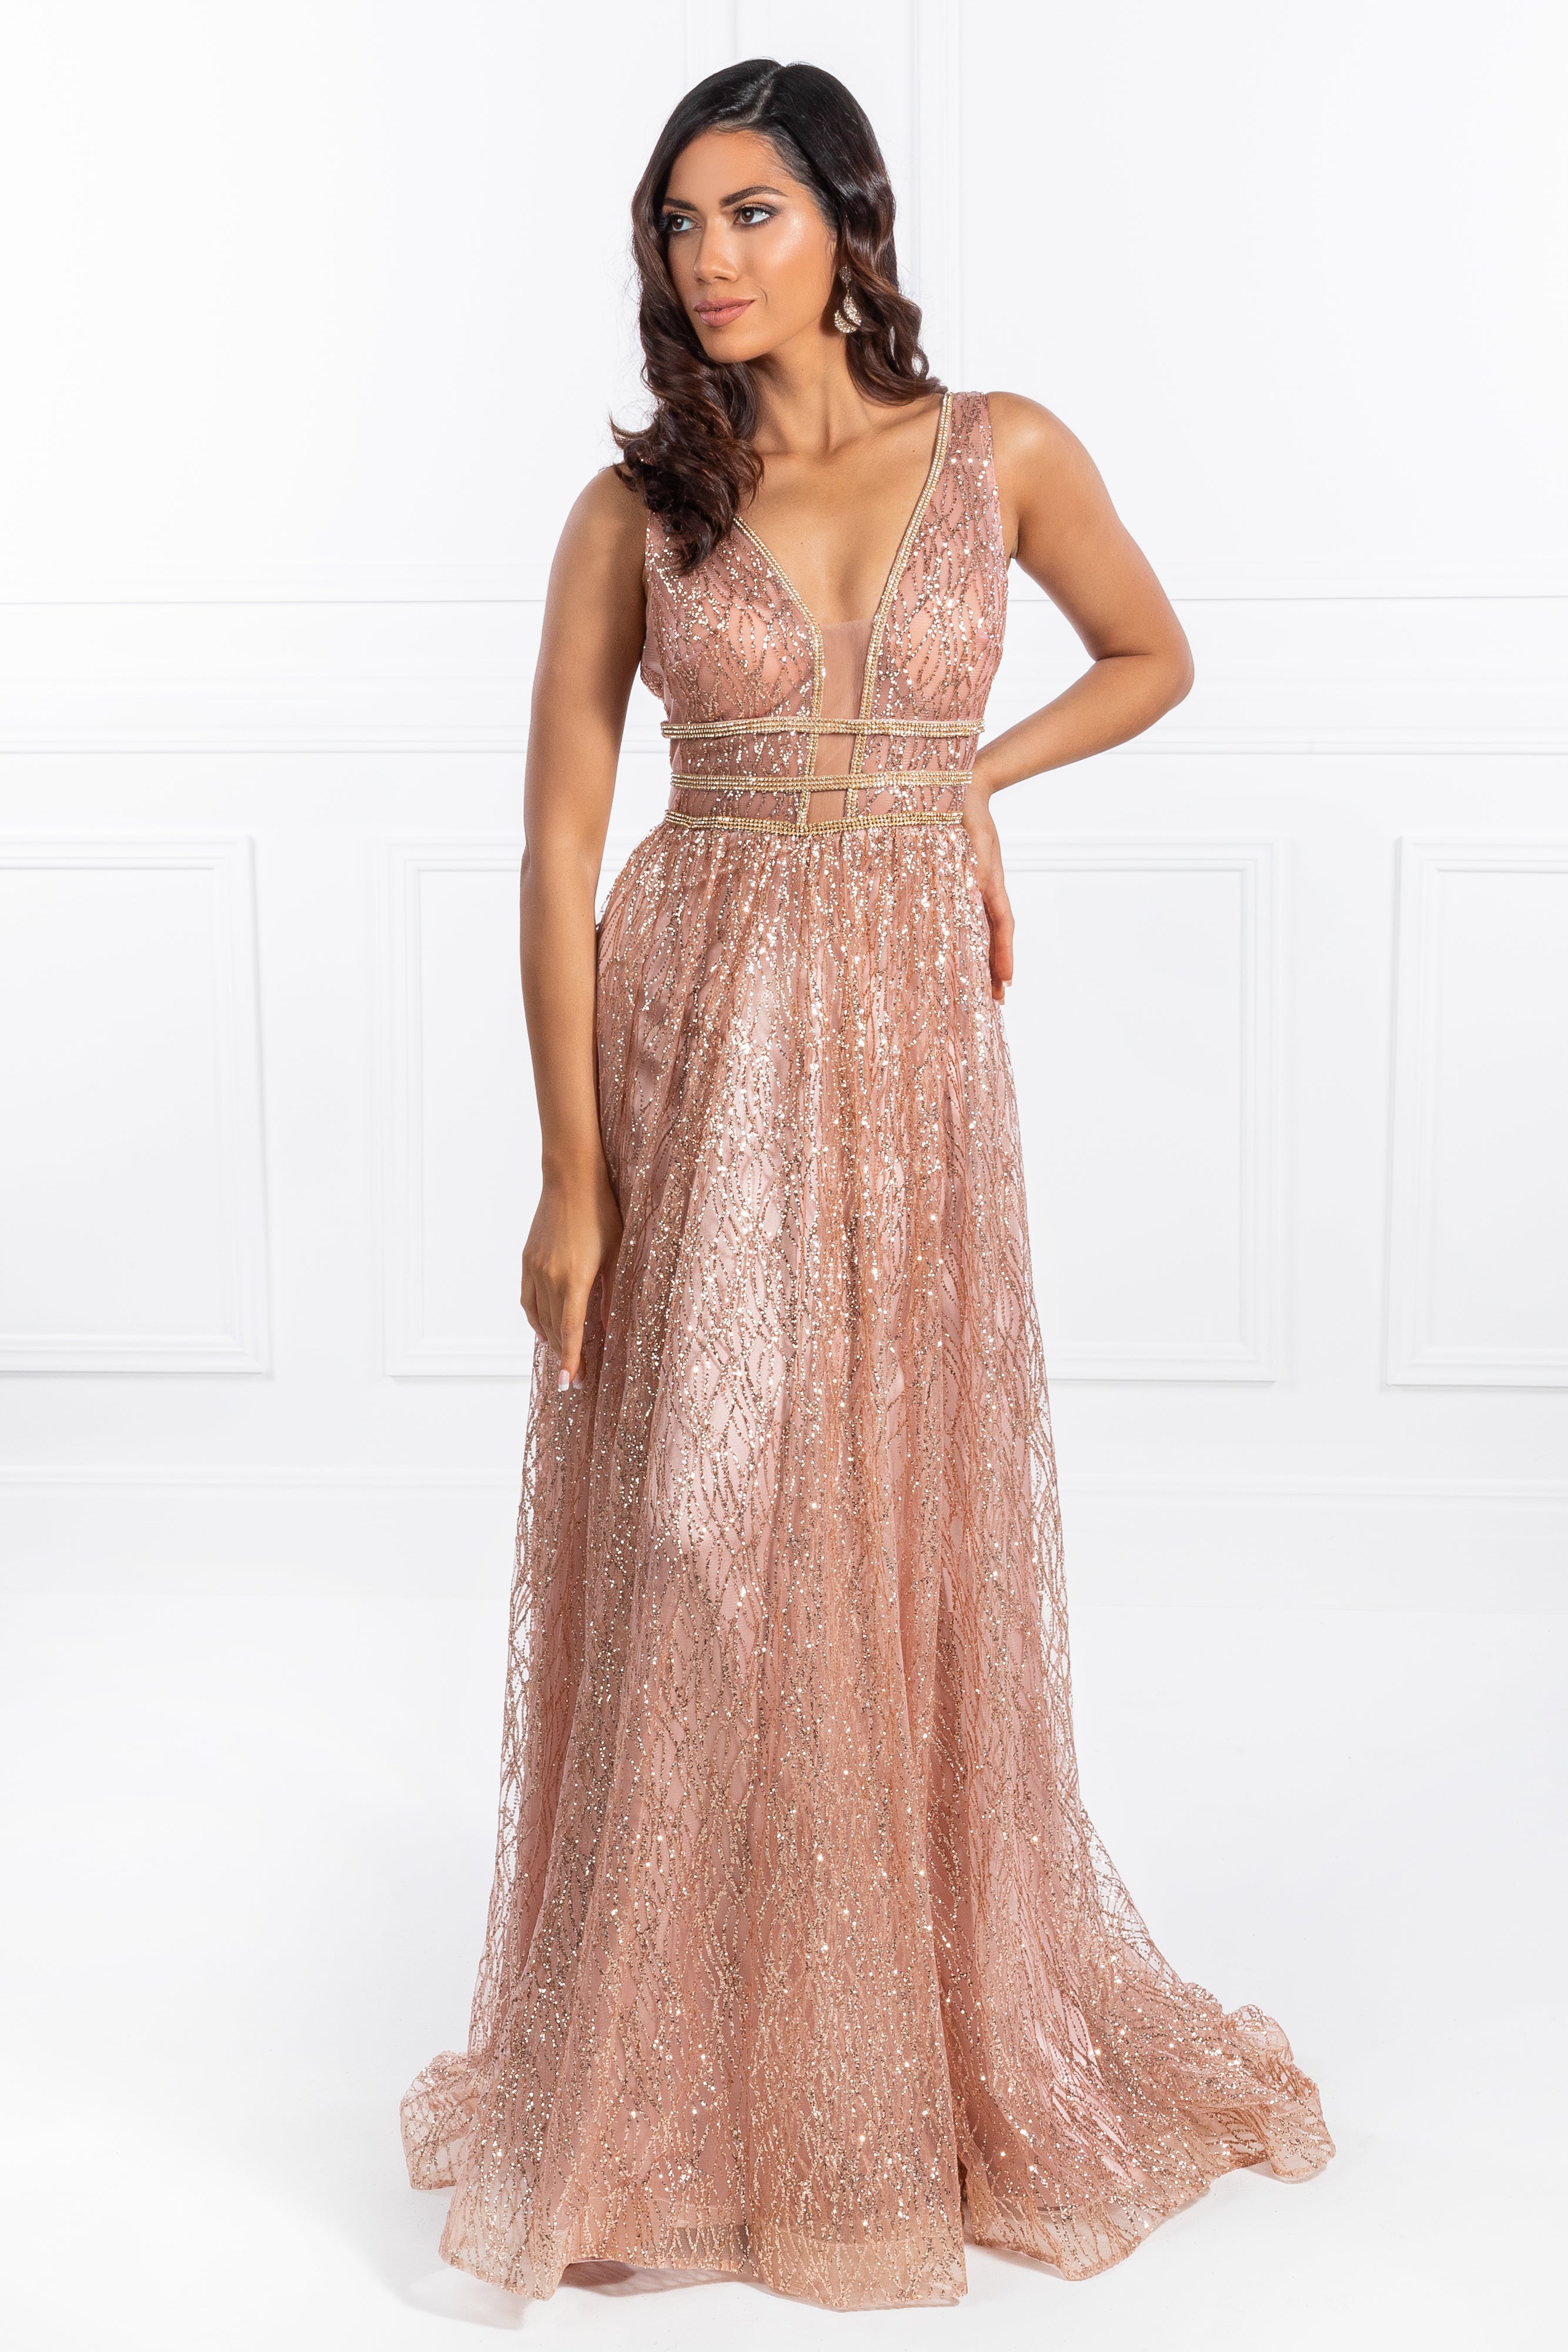 Honey Couture ENYA Rose Gold Glitter Formal Gown